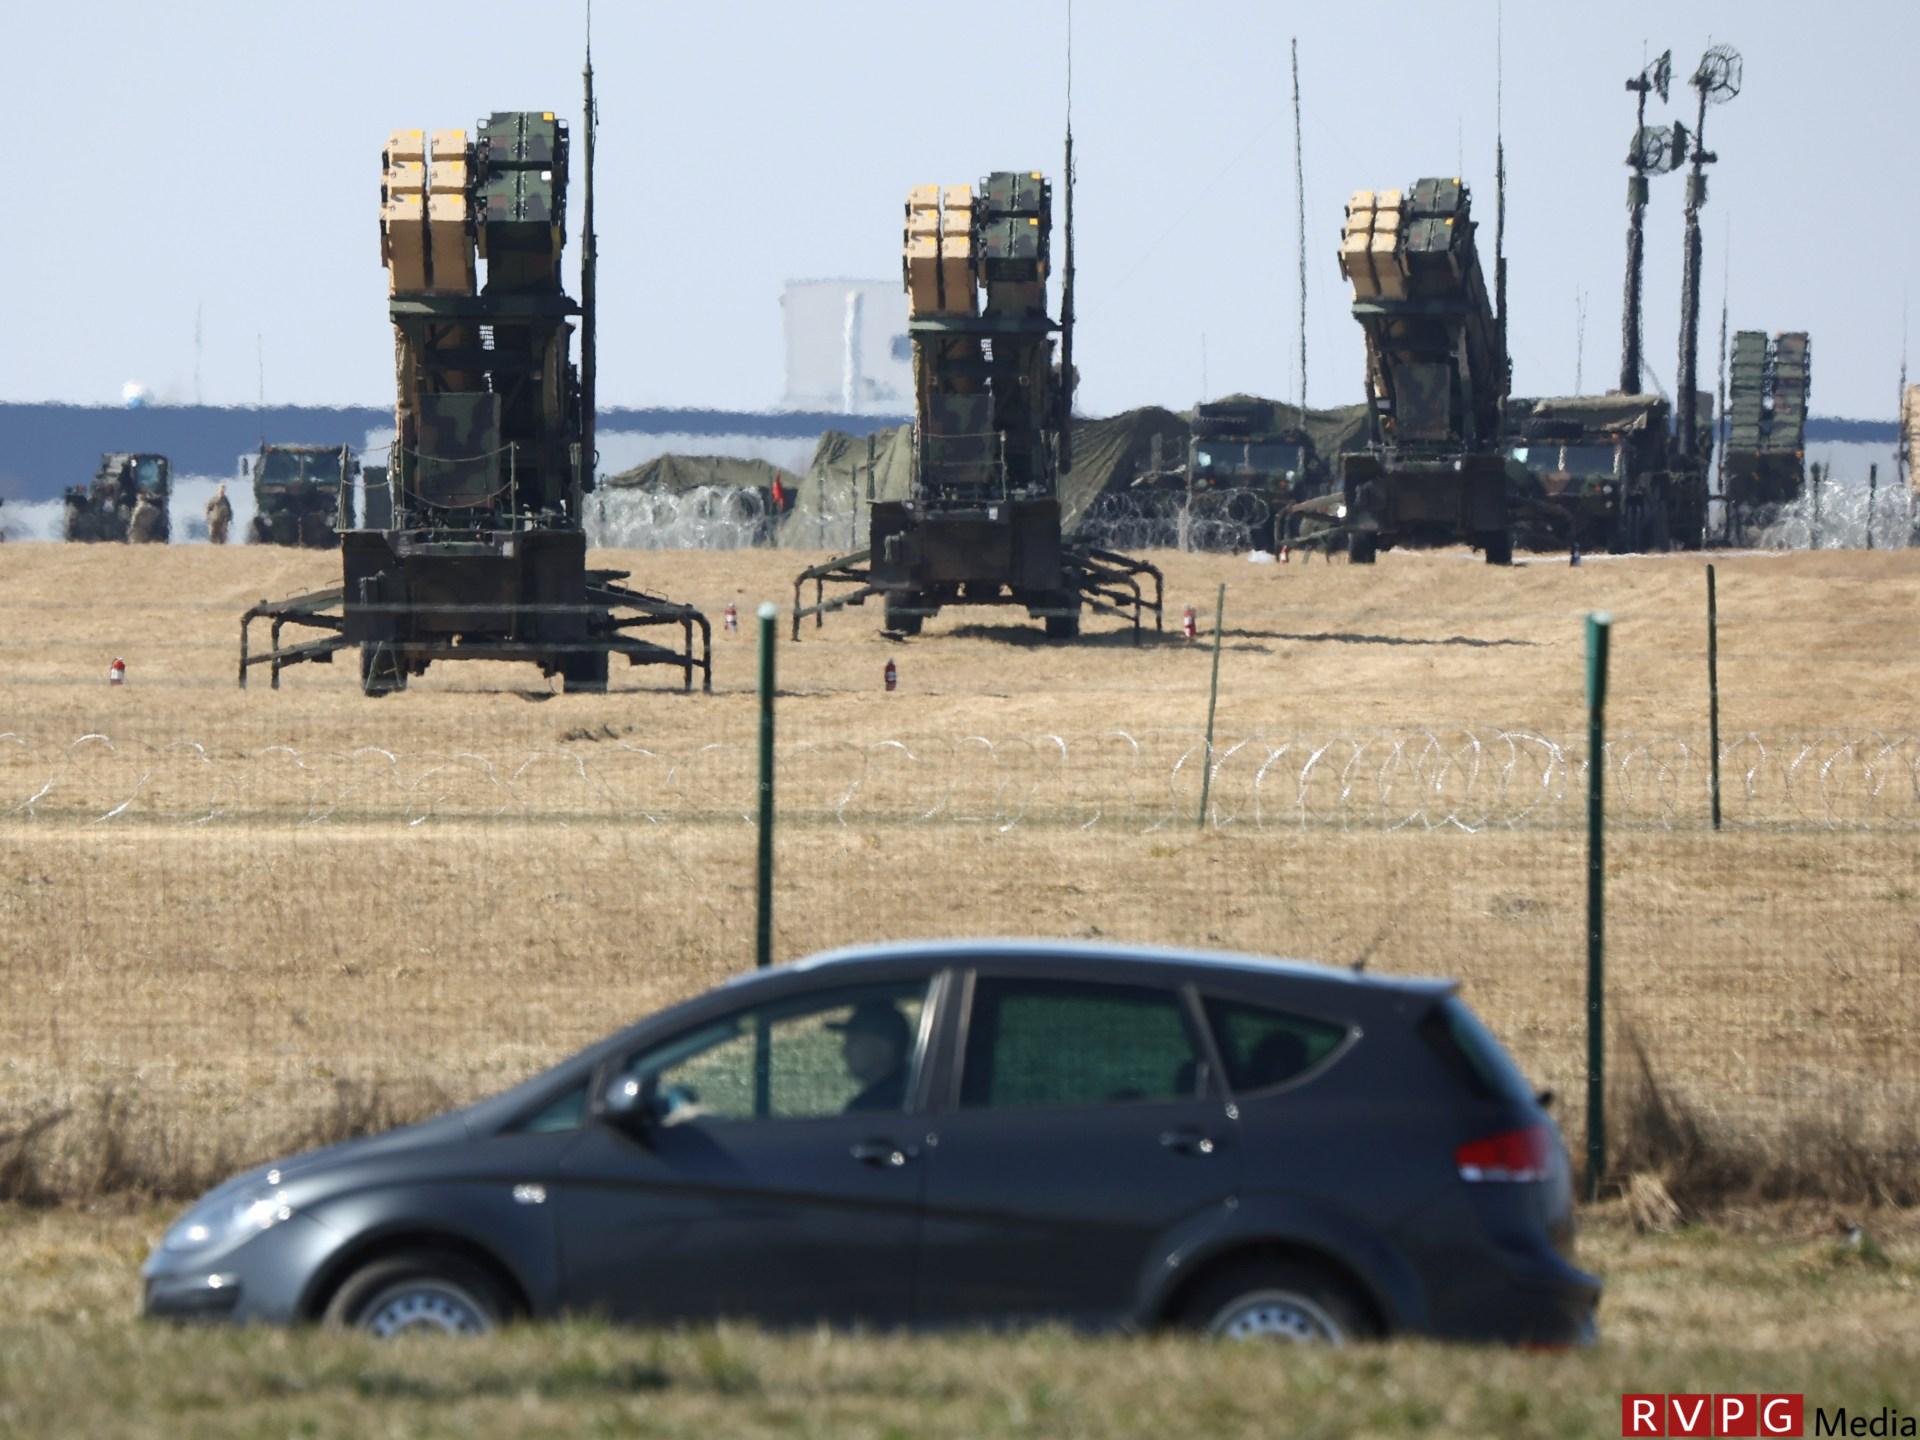 The US is supplying Ukraine with Patriot missiles as part of $6 billion in defense aid